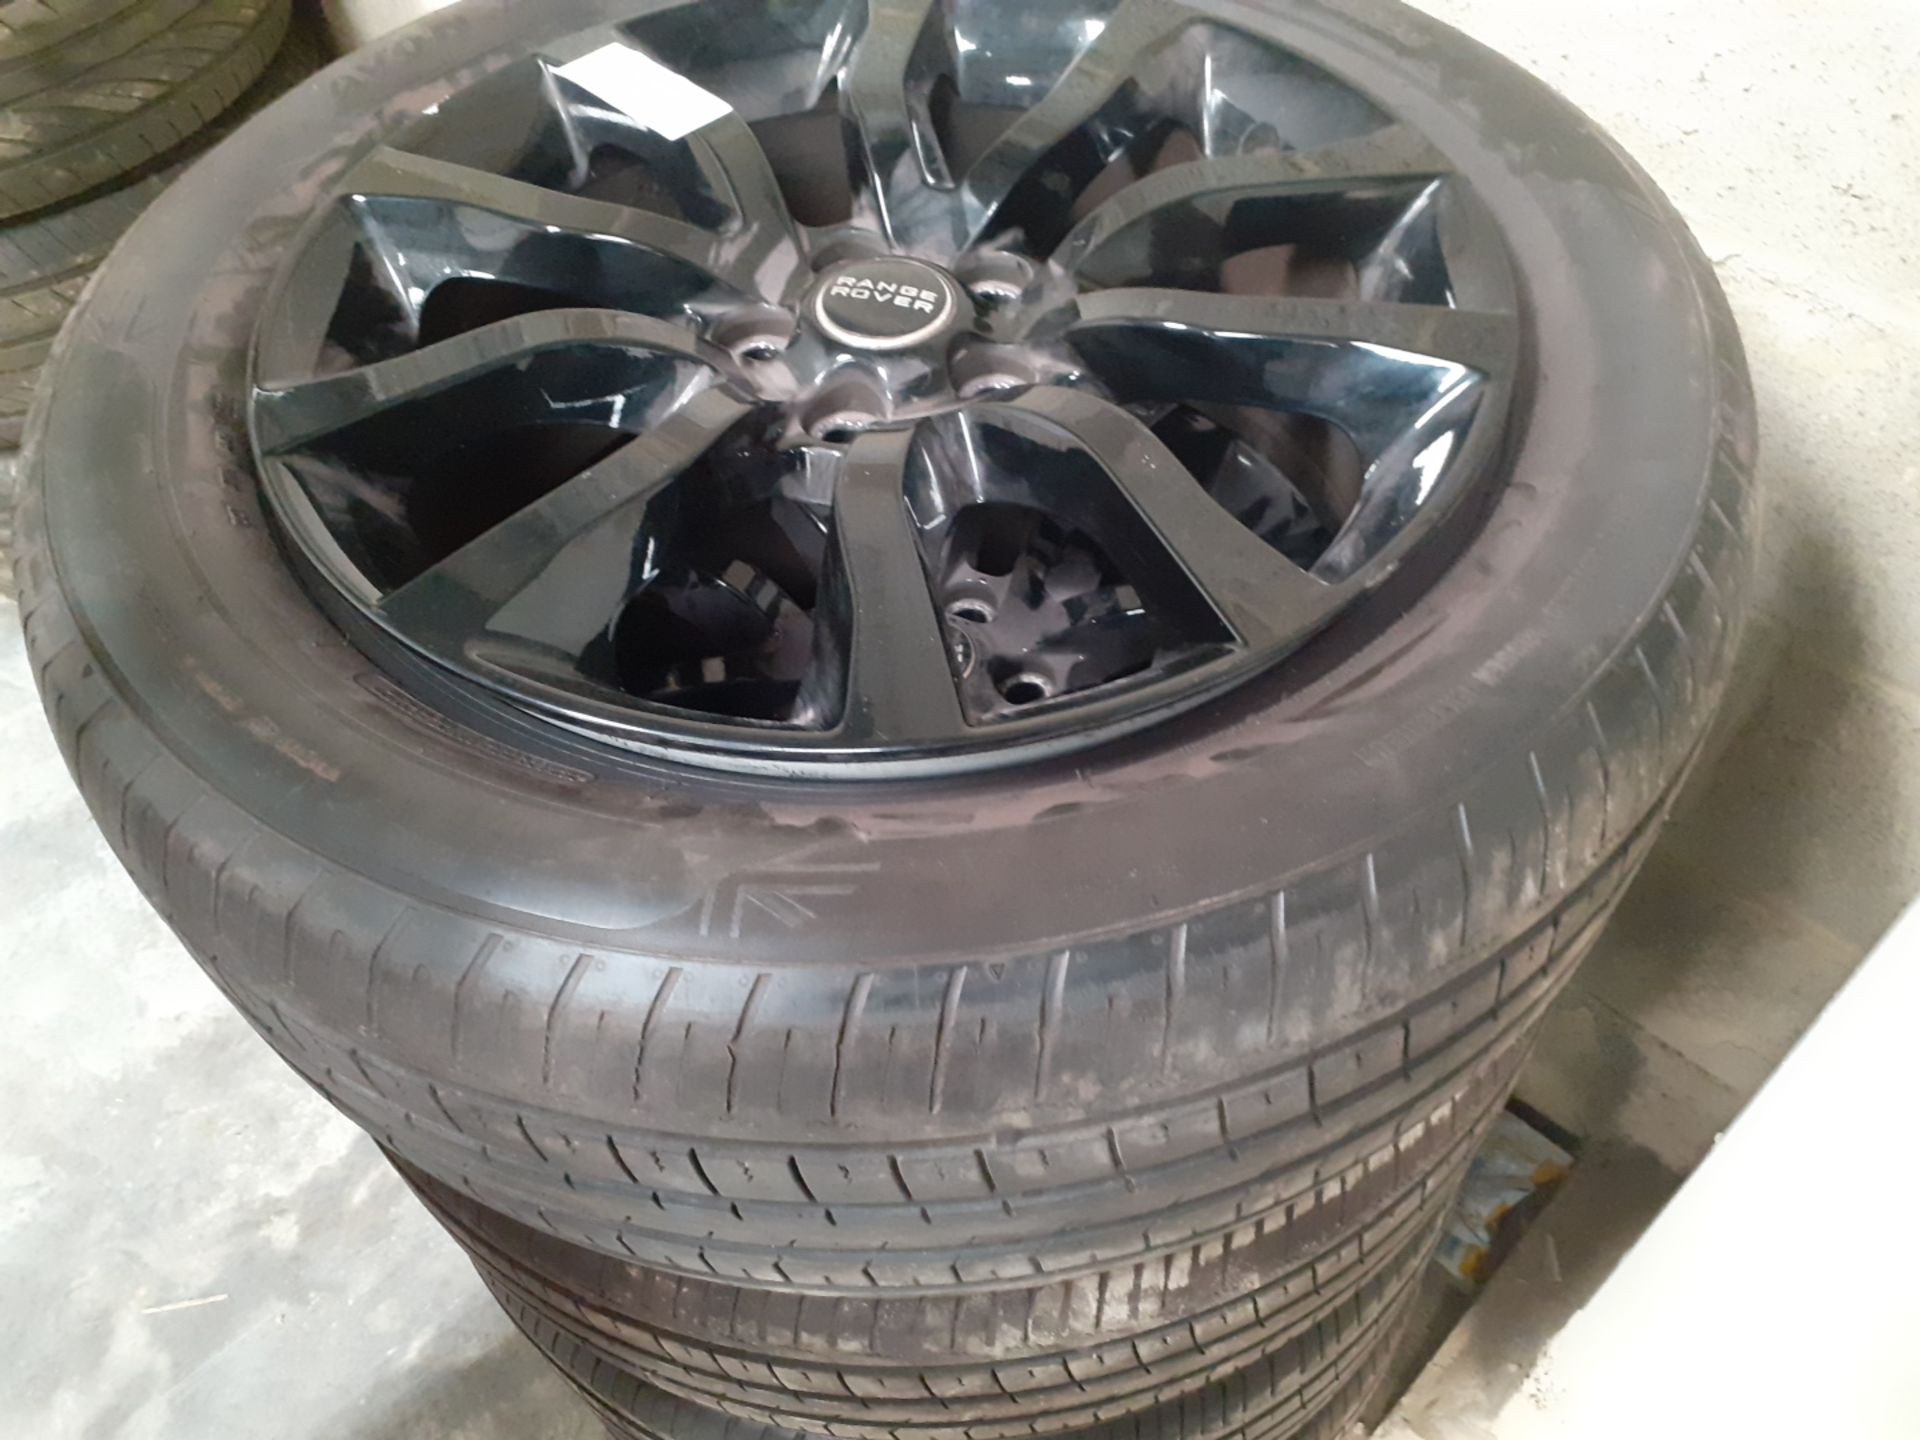 JOB LOT OF 30 SETS OF ALLOY WHEELS WITH TYRES, LAND ROVER RANGE ROVER, OVER £31K RRP *NO VAT* - Image 7 of 17